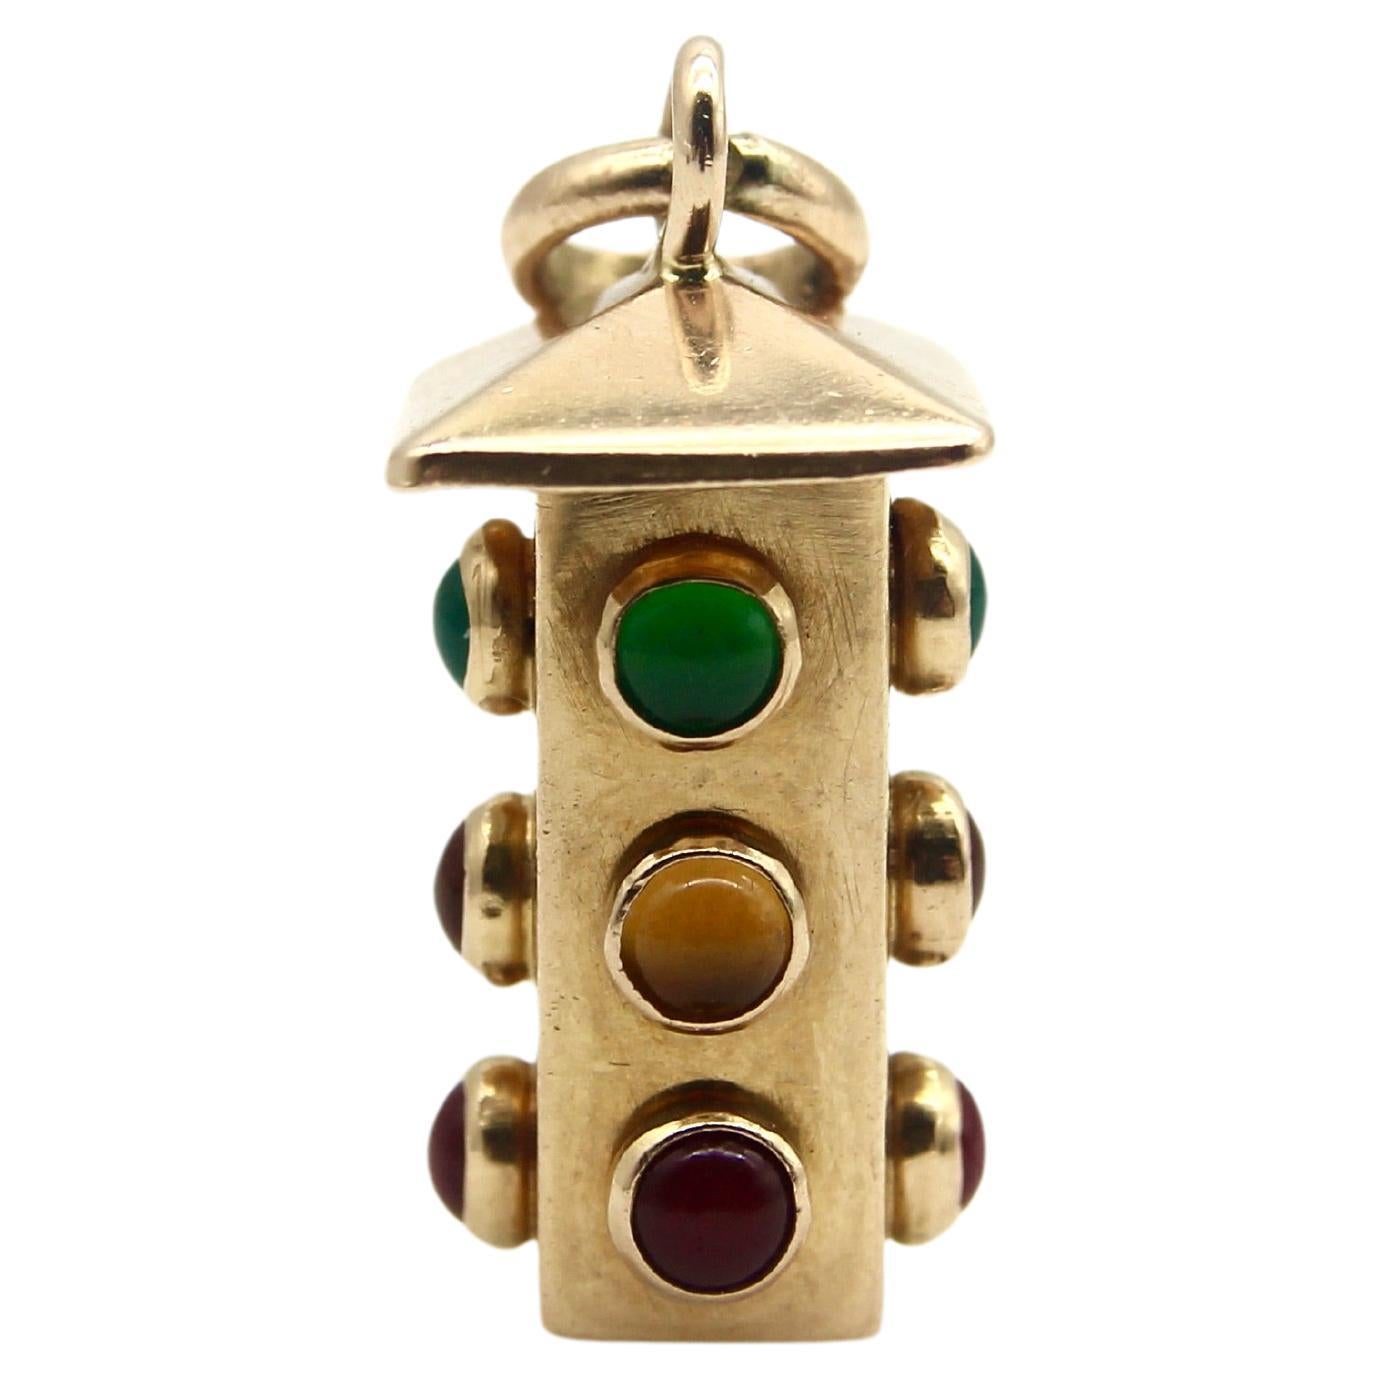 Vintage 18K Gold Italian Stoplight Charm with Glass Cabochons 